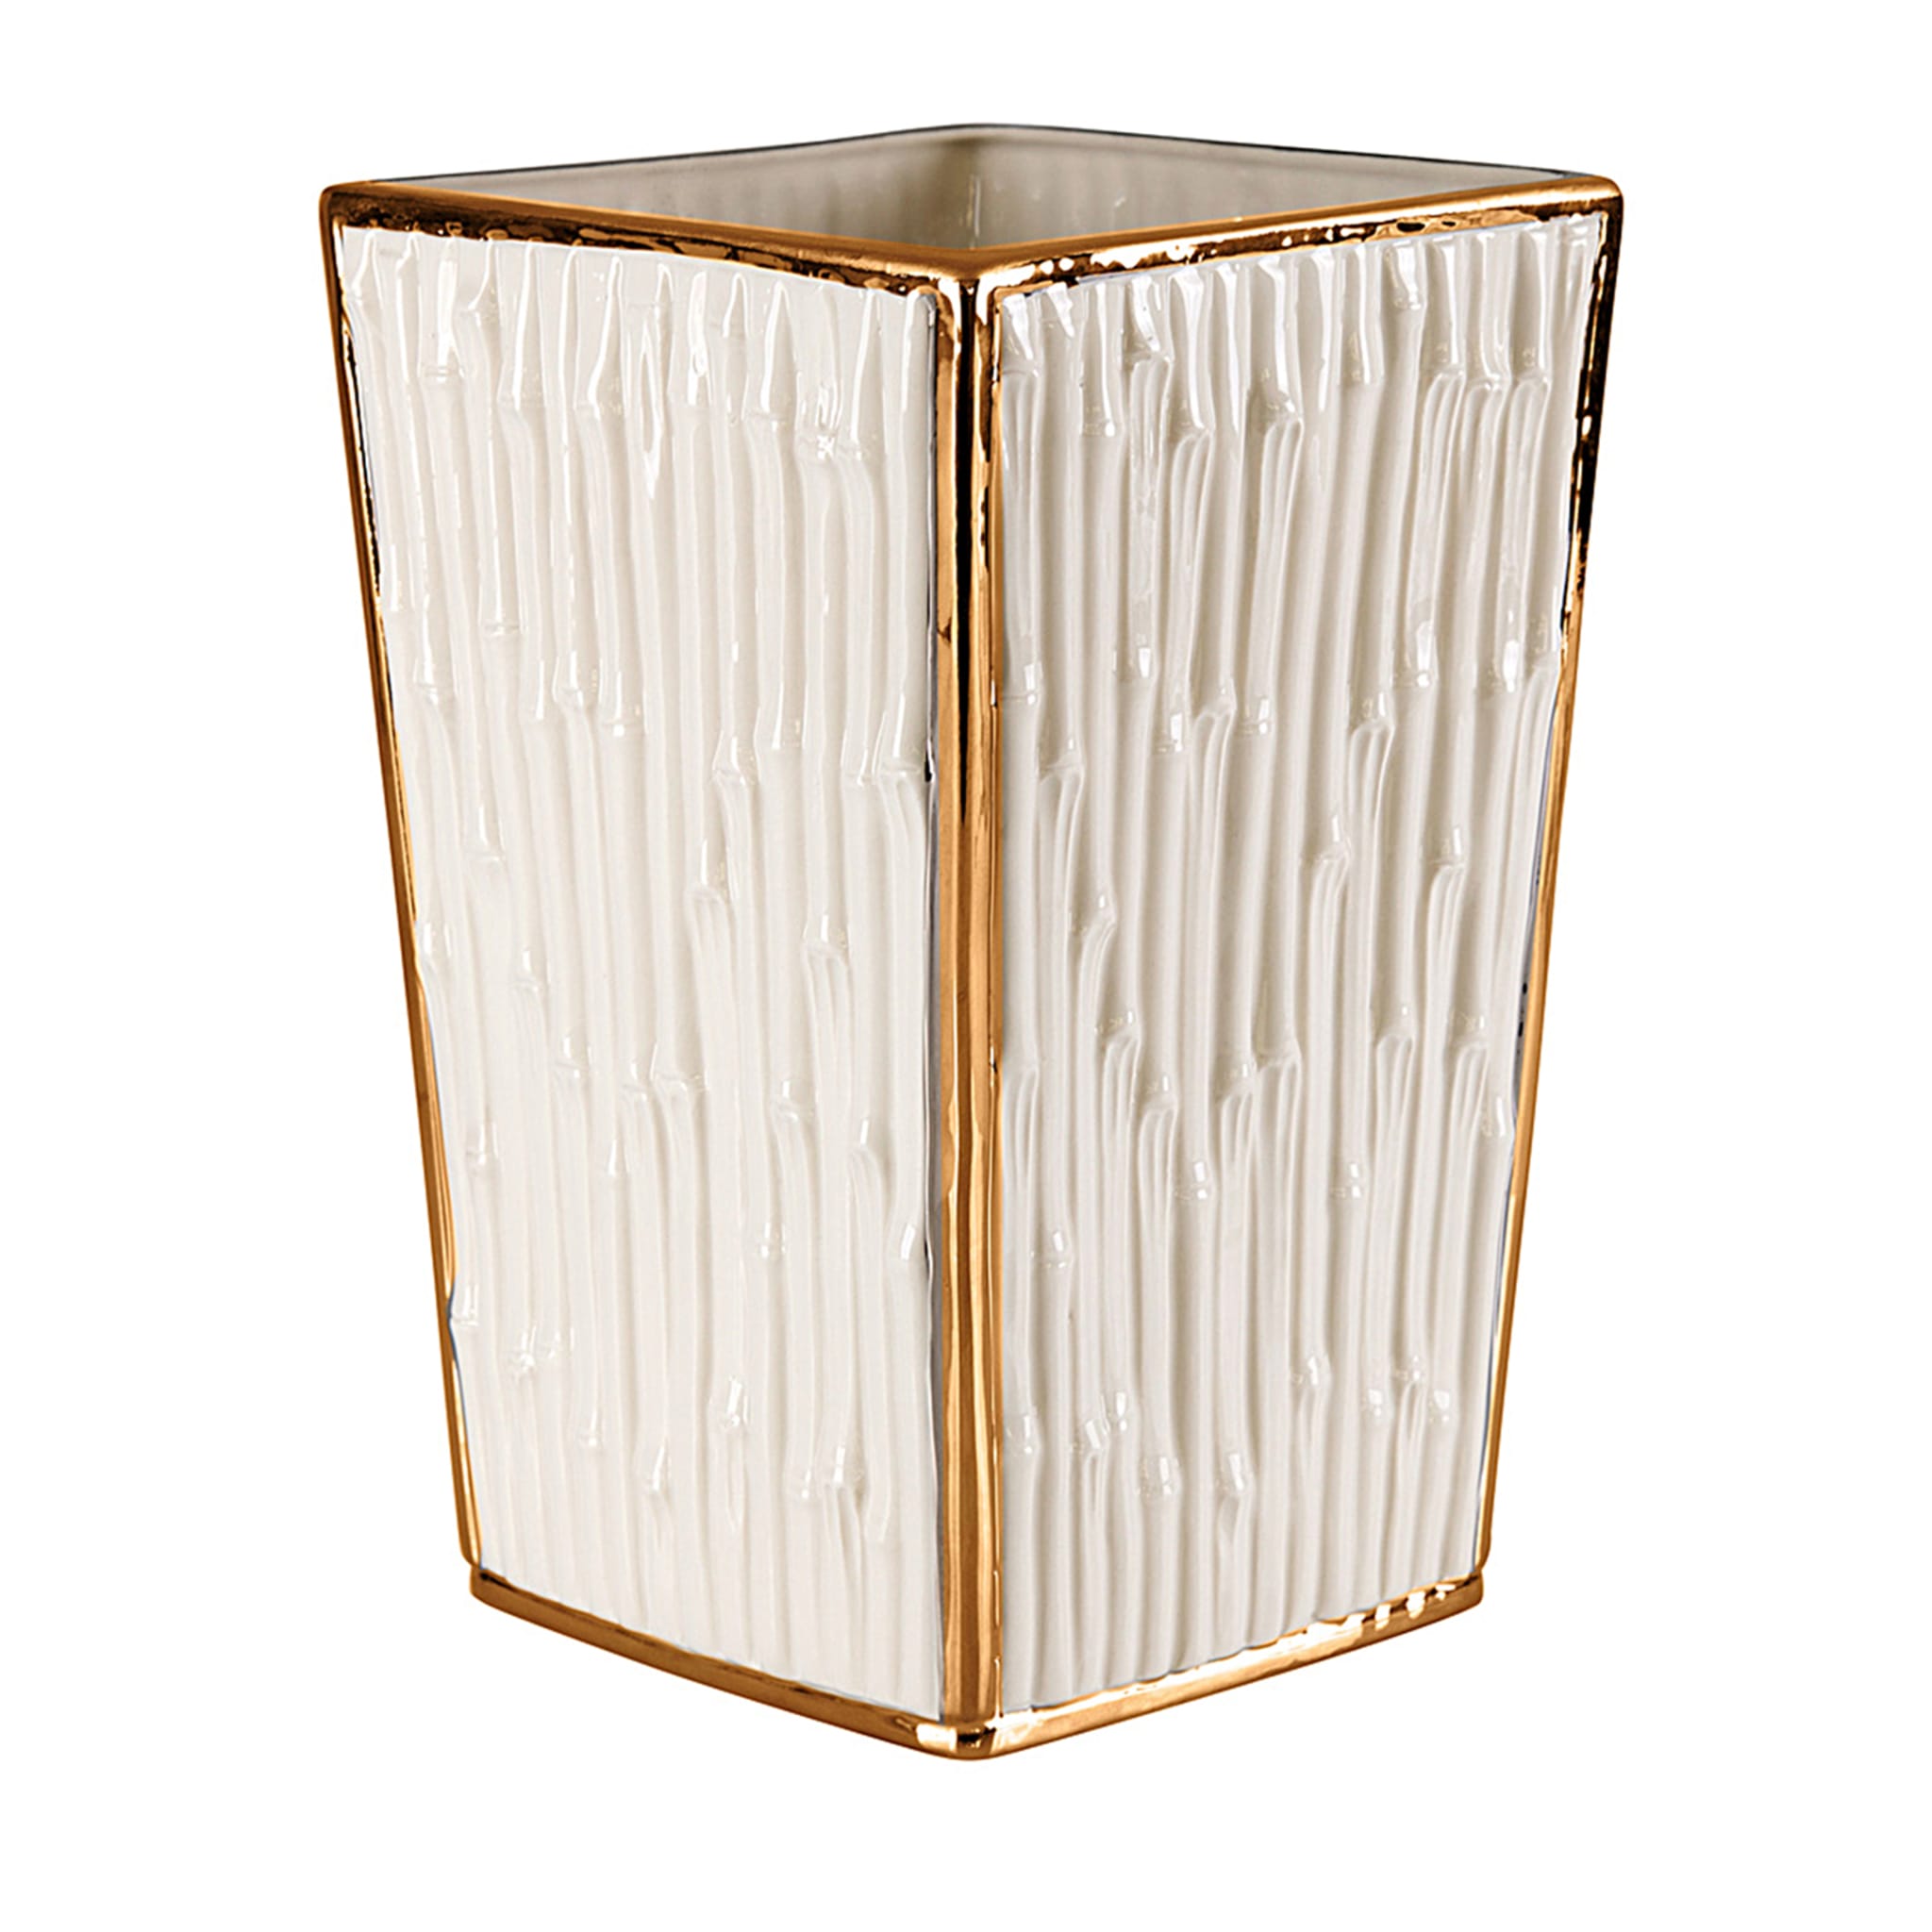 BAMBOO WASTE BASKET - WHITE AND GOLD - Main view